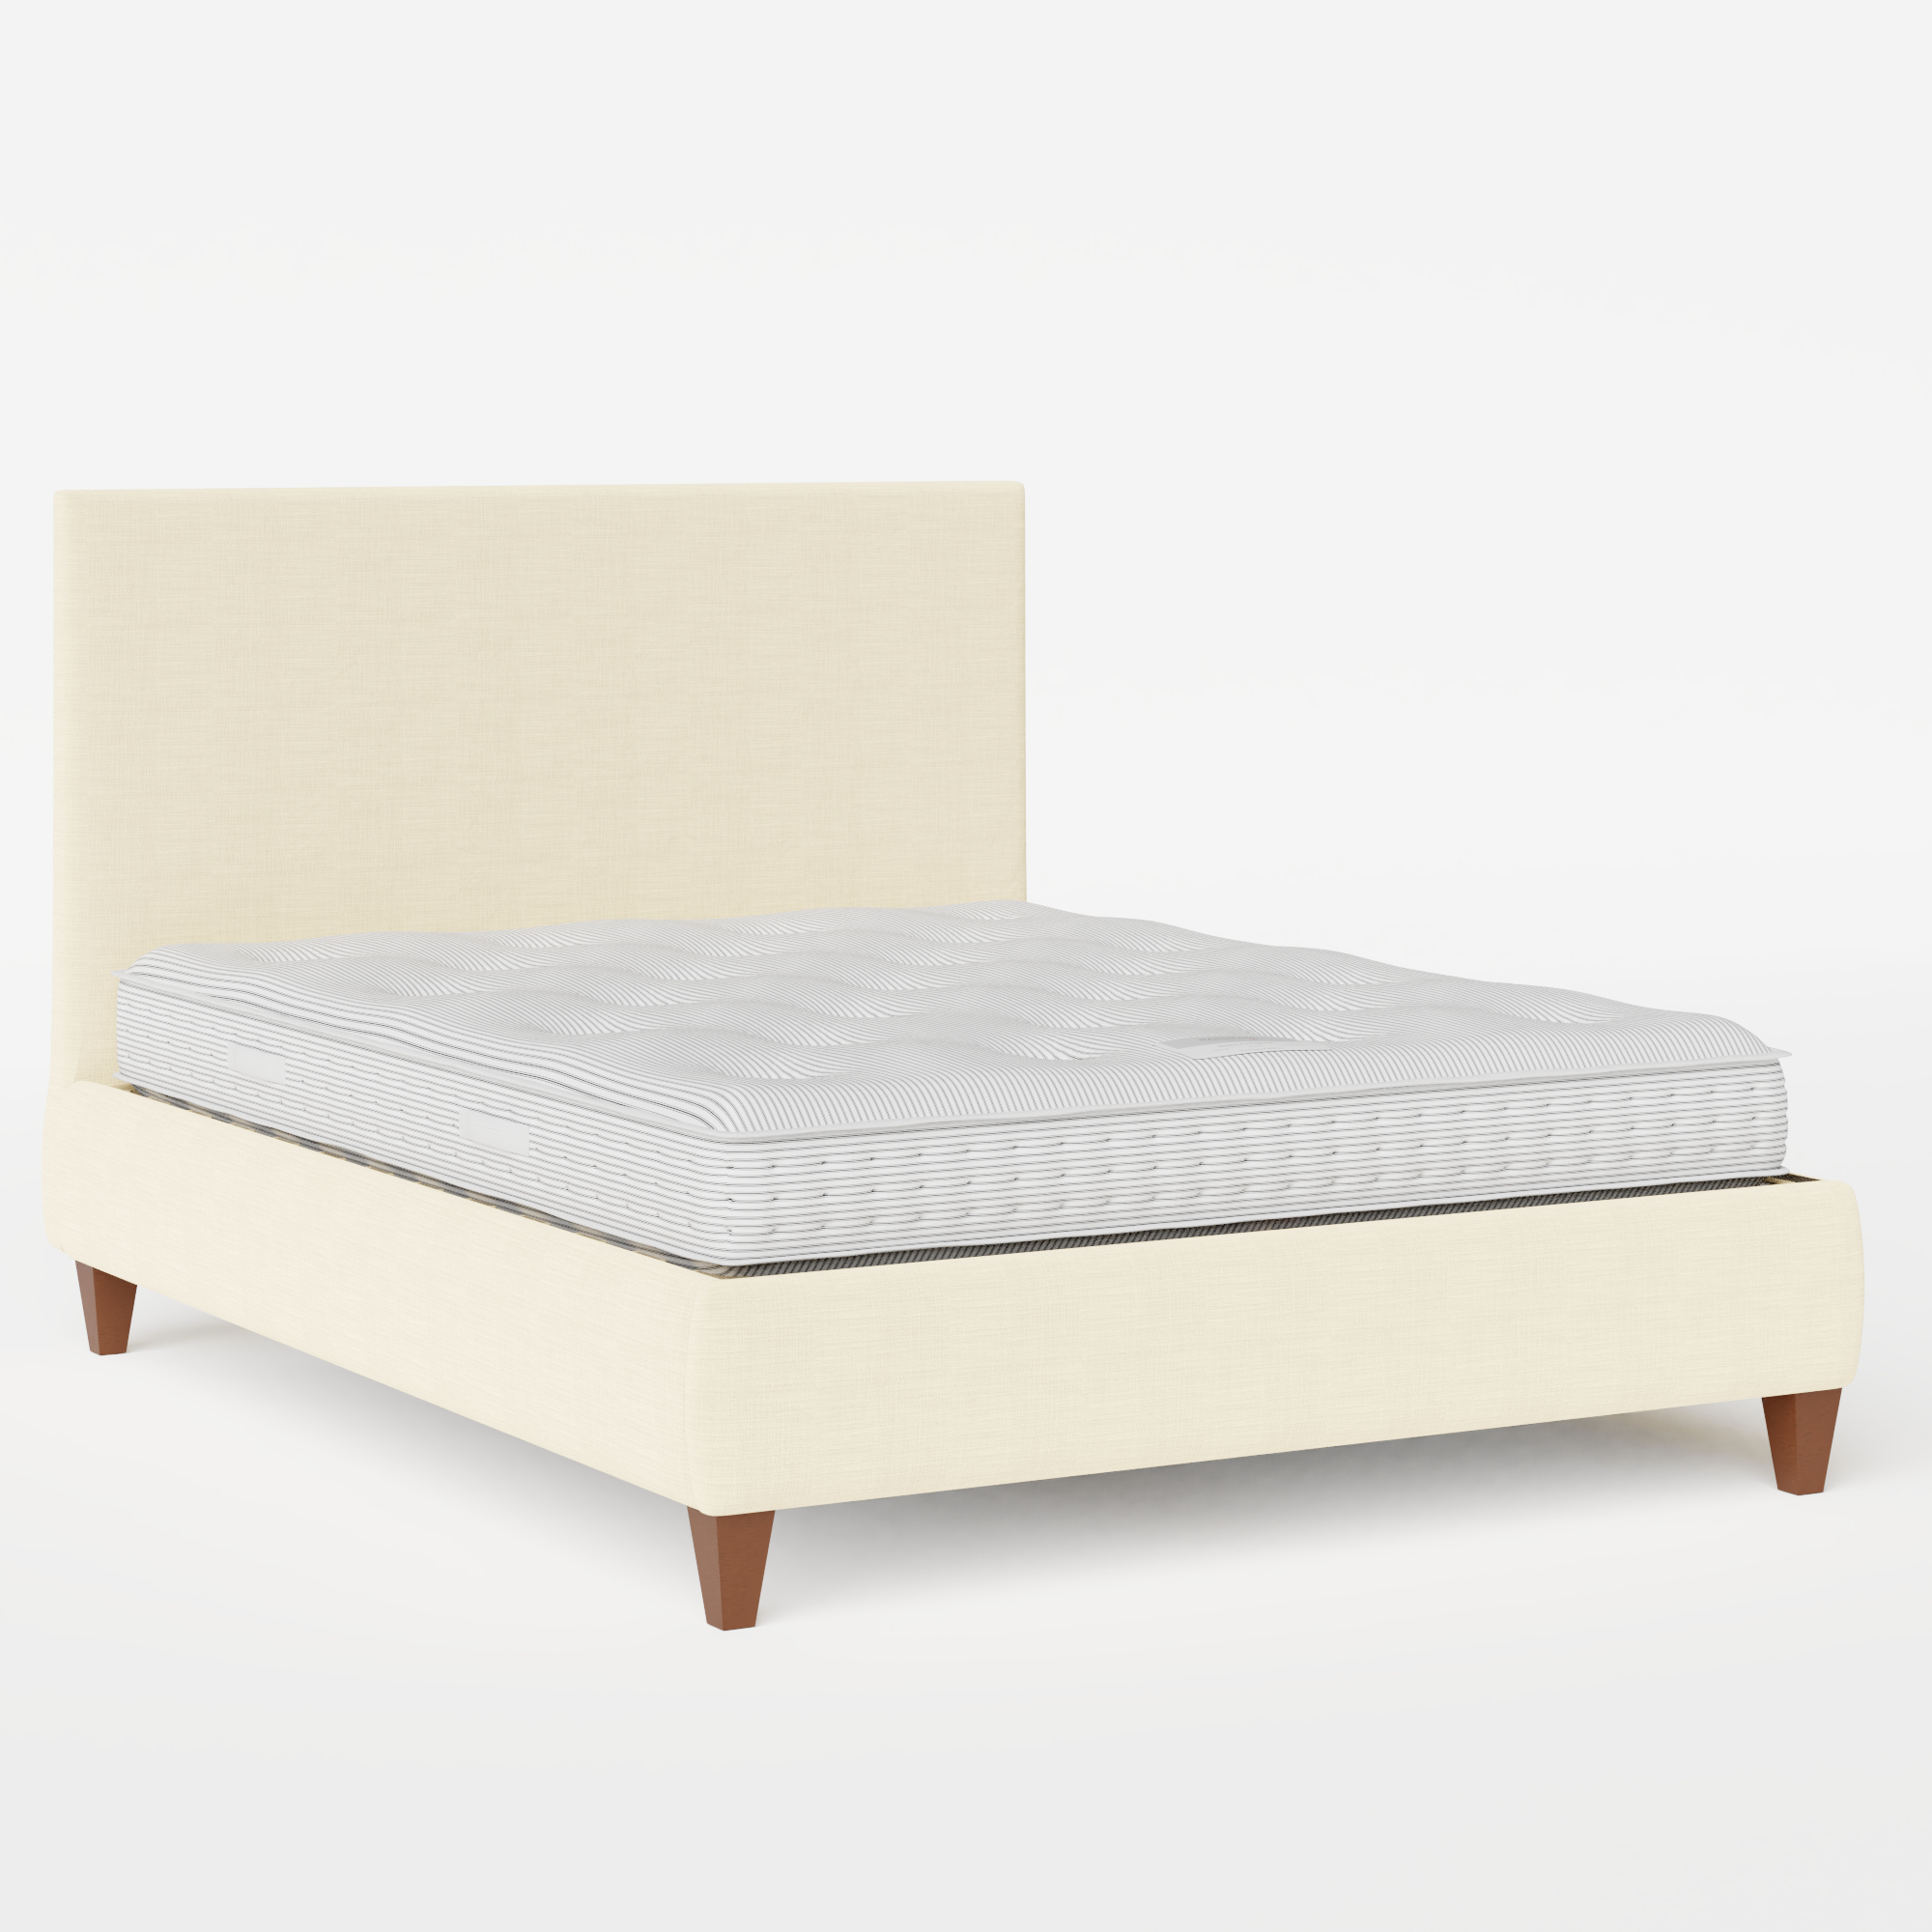 Yushan stoffen bed in natural